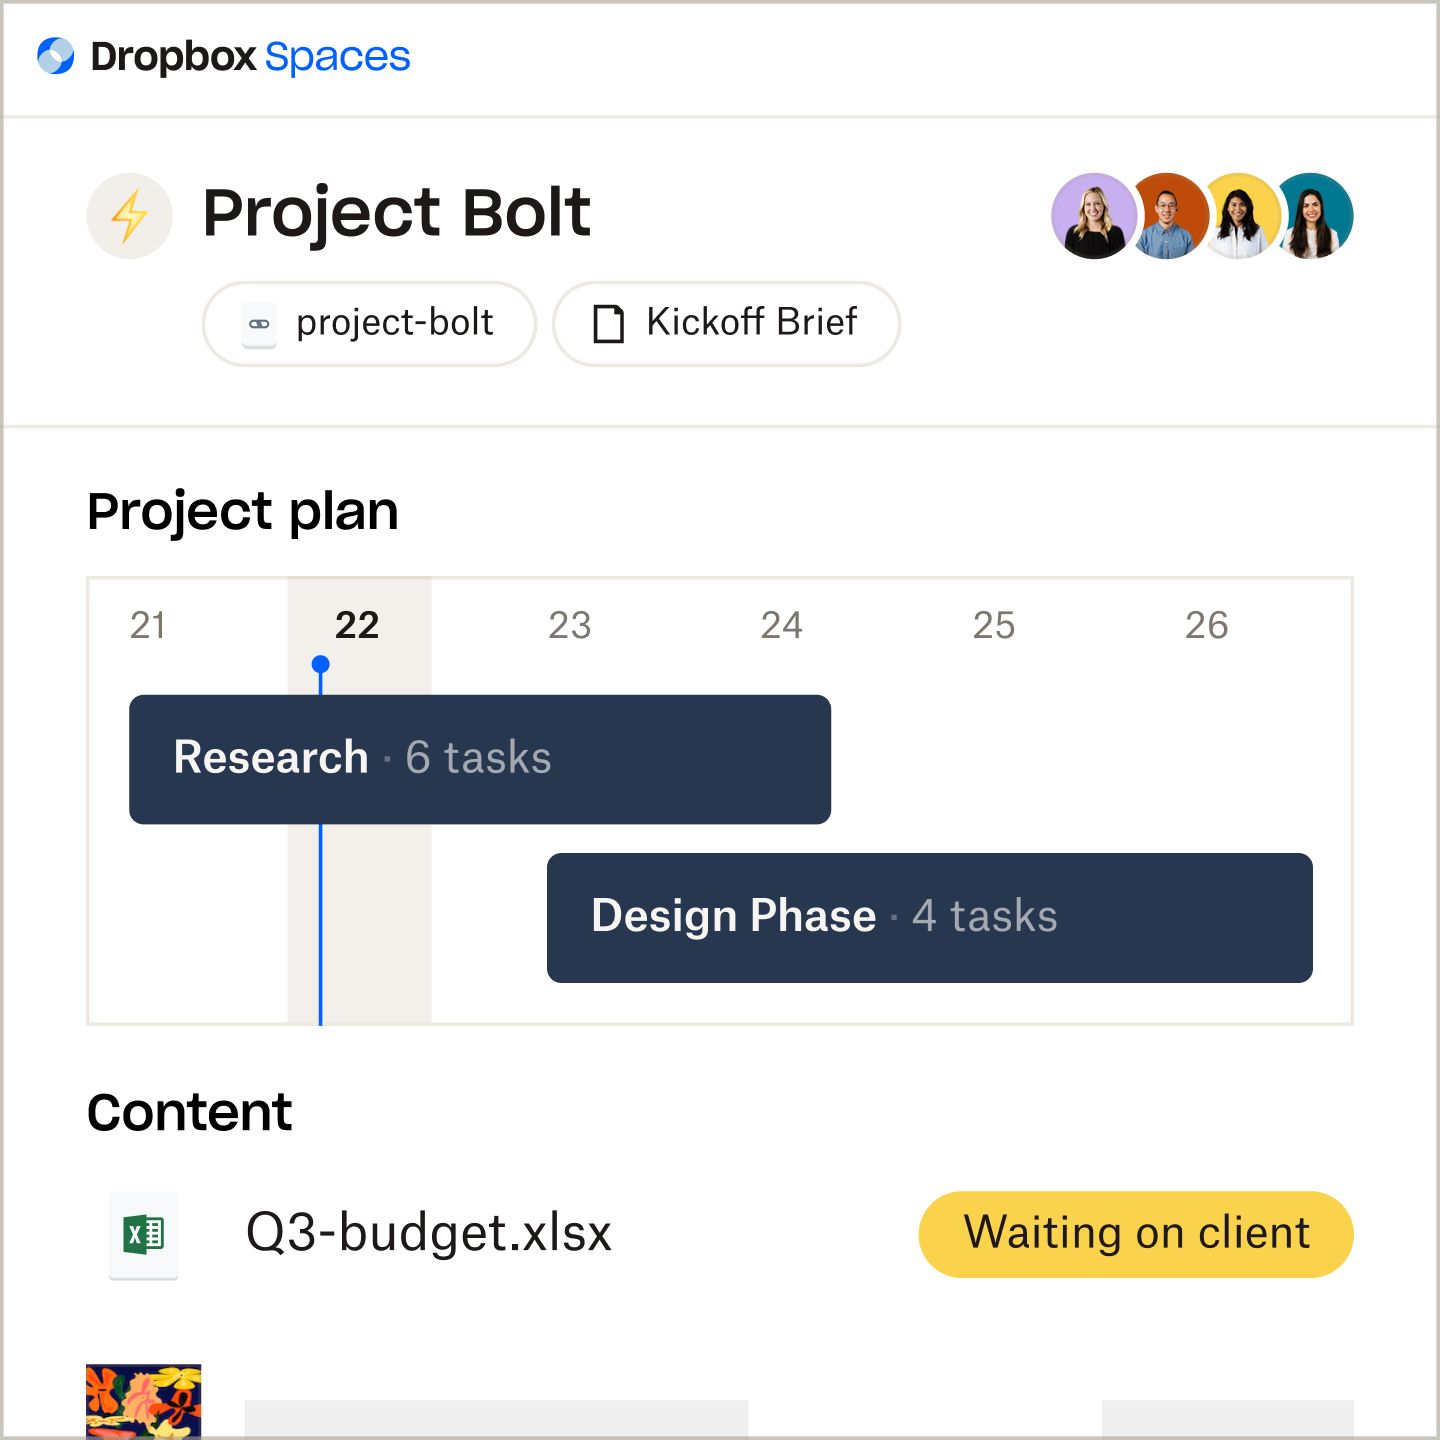 Screenshot of “Project Bolt” with project plan and linked content in Dropbox Spaces